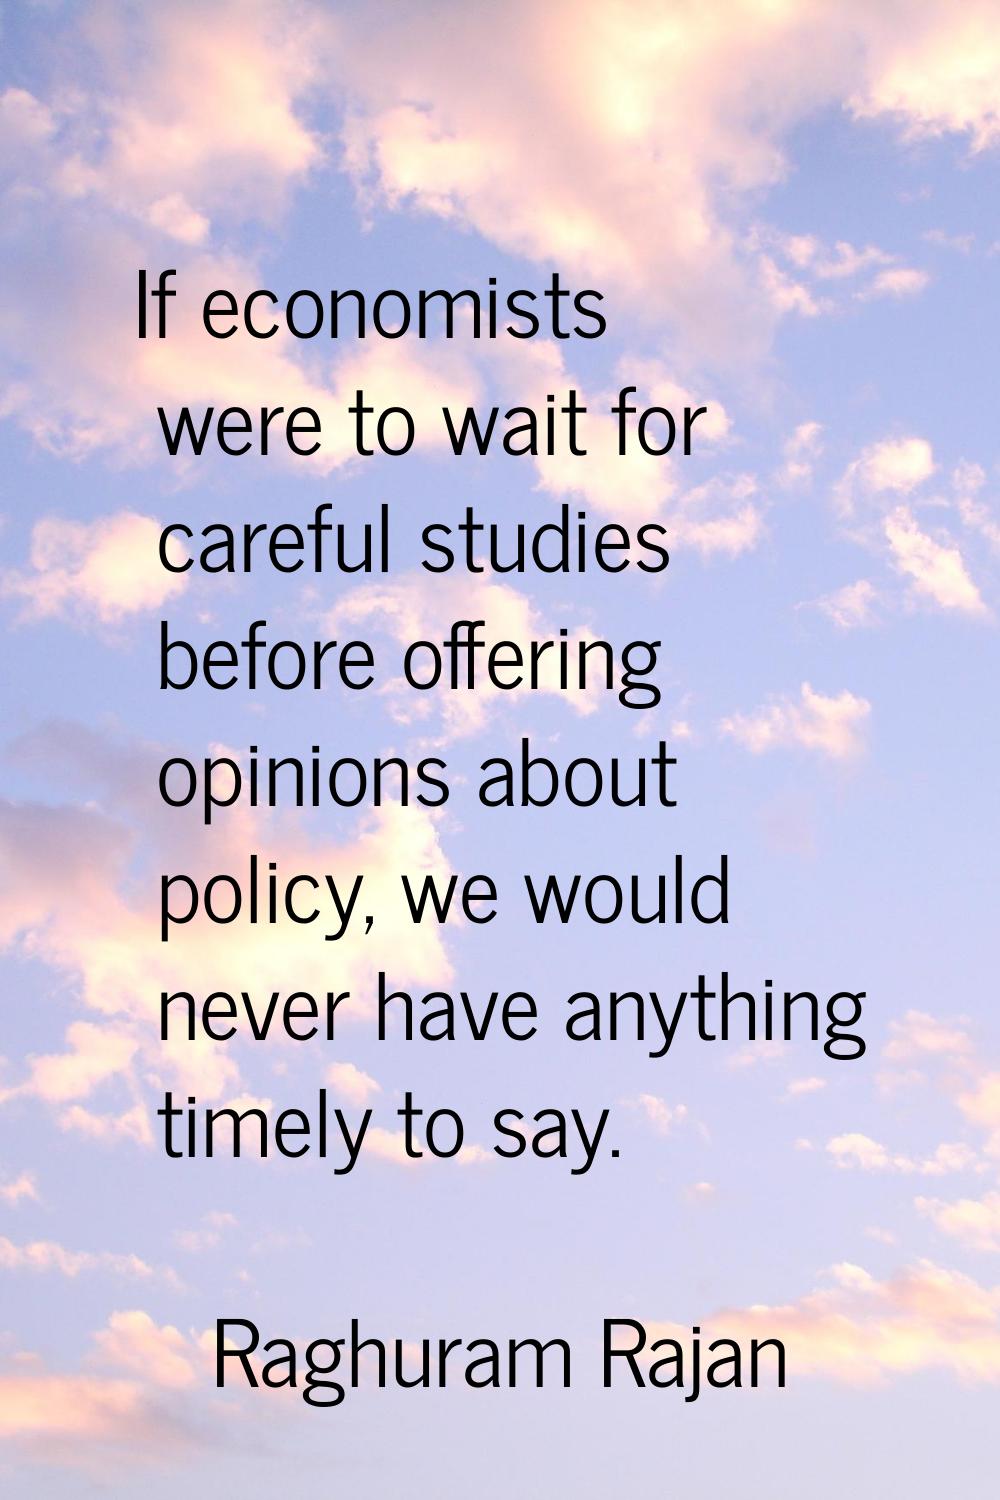 If economists were to wait for careful studies before offering opinions about policy, we would neve